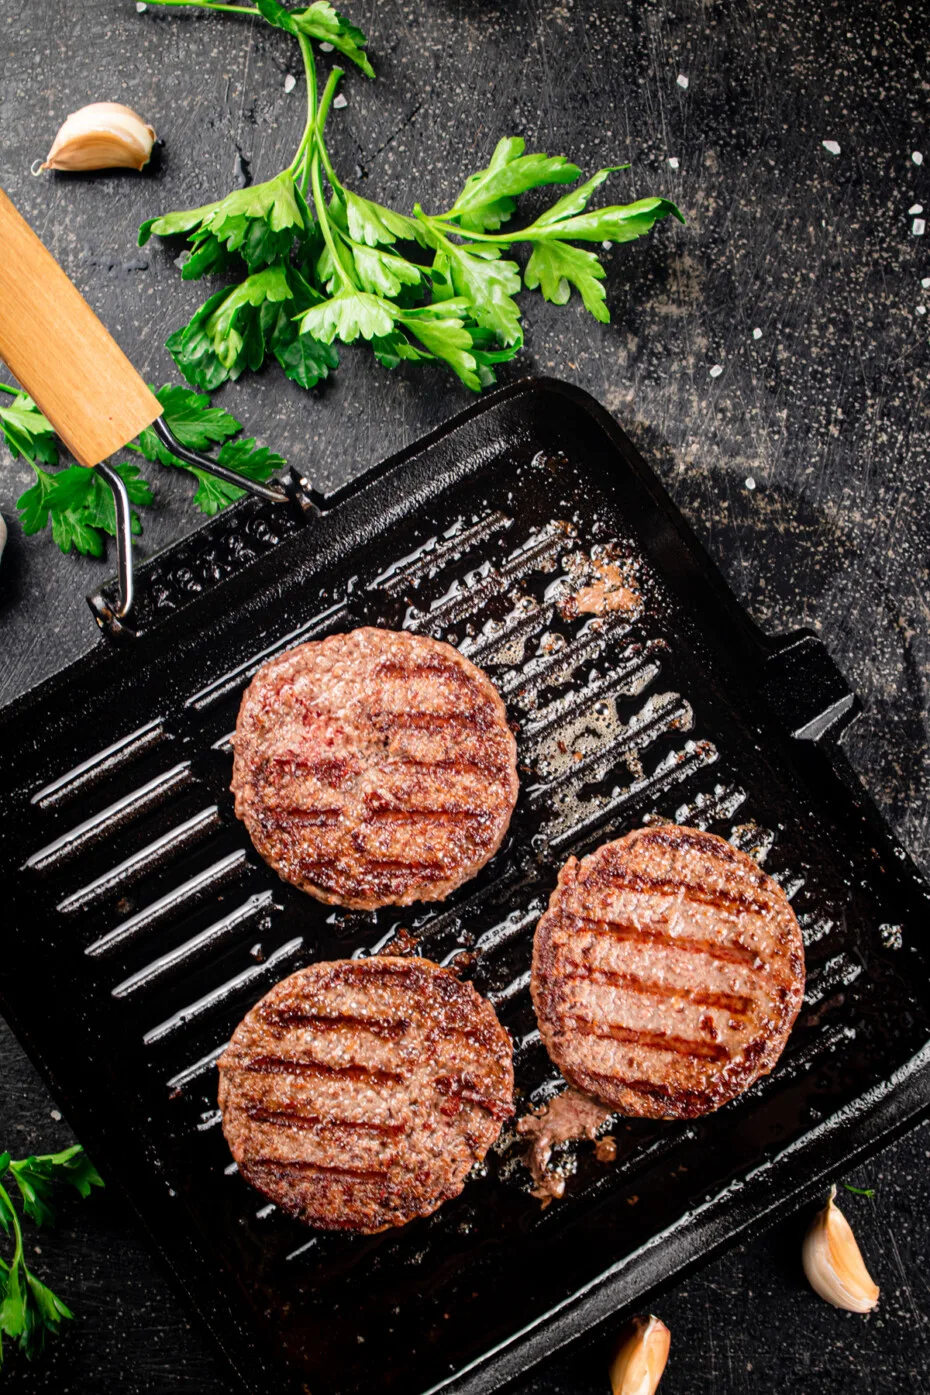 Grilled Burger In A Frying Pan.